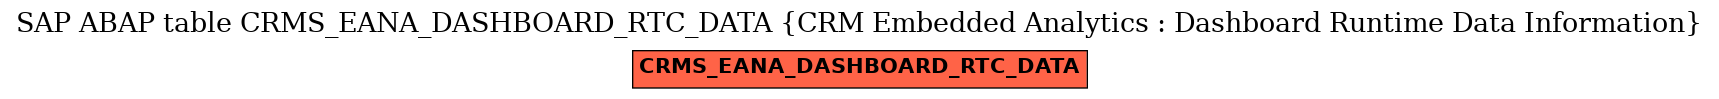 E-R Diagram for table CRMS_EANA_DASHBOARD_RTC_DATA (CRM Embedded Analytics : Dashboard Runtime Data Information)